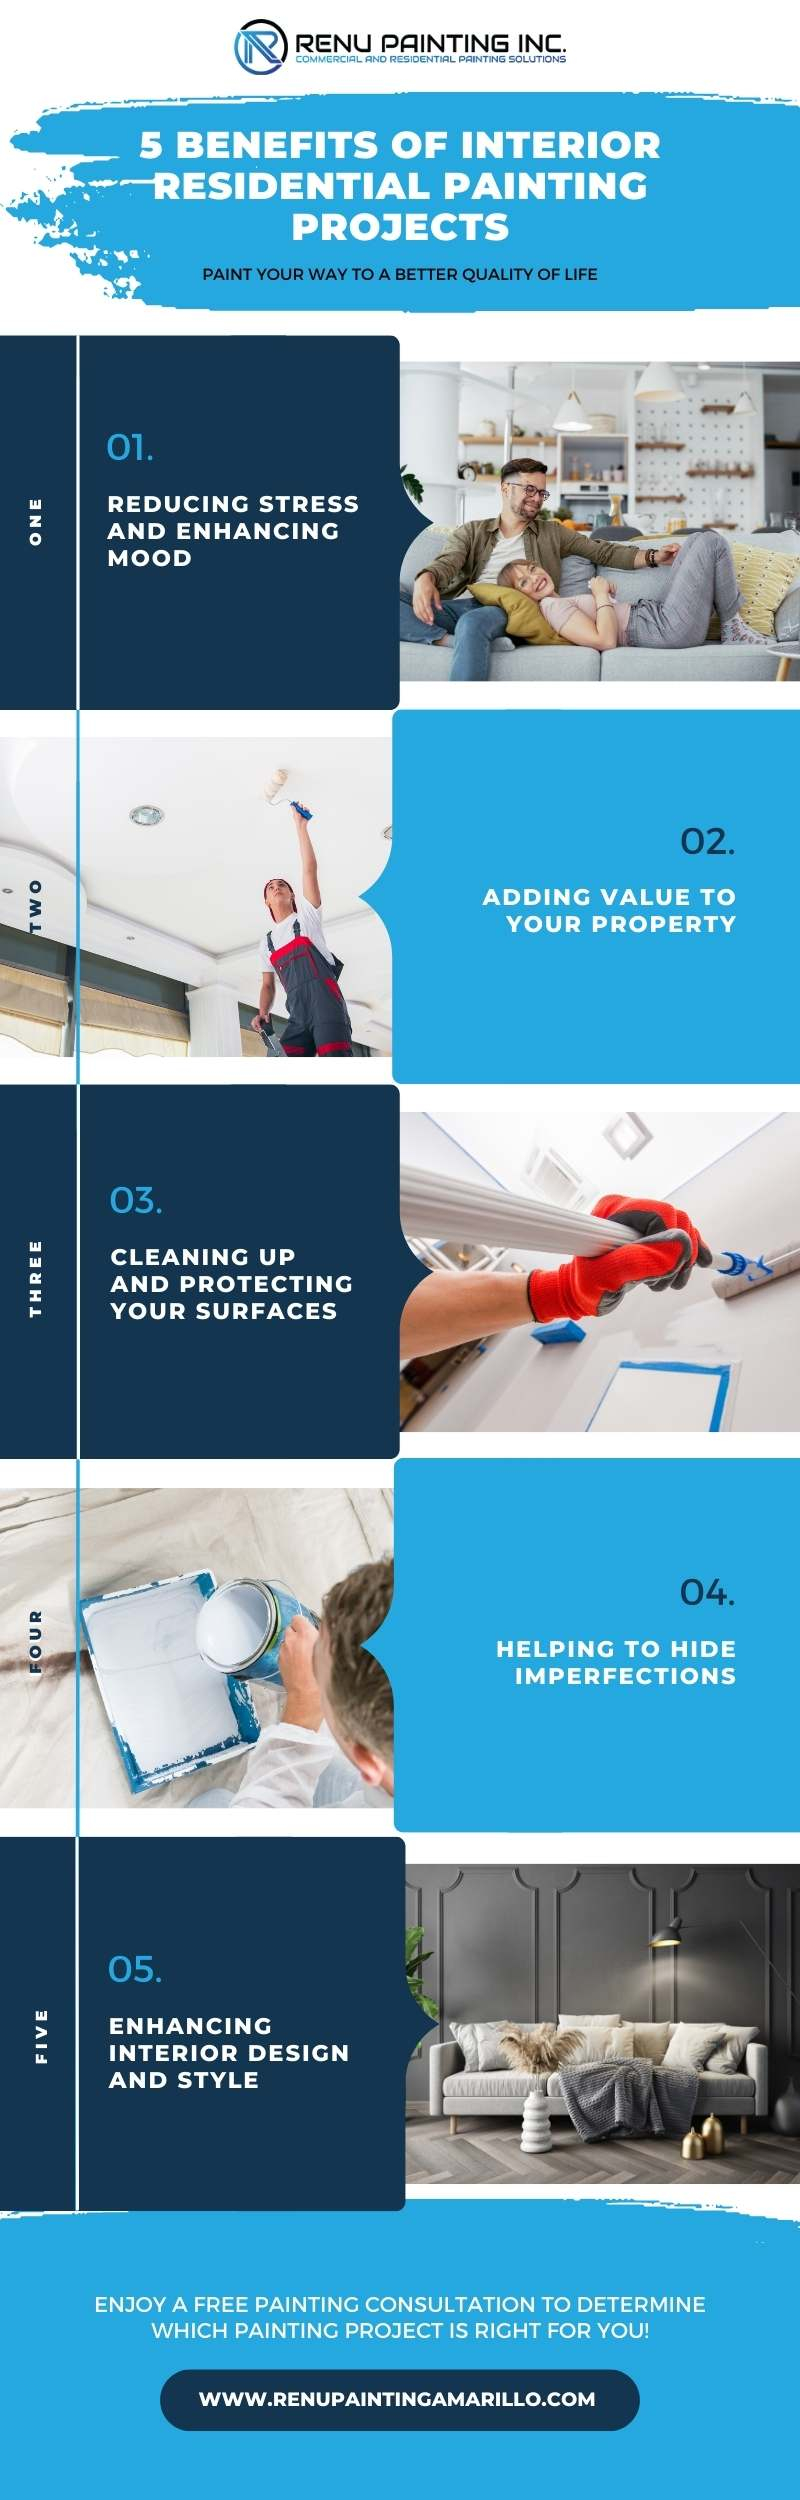 M24883 - Infographic - 5 Benefits of Interior Residential Painting Projects.jpg